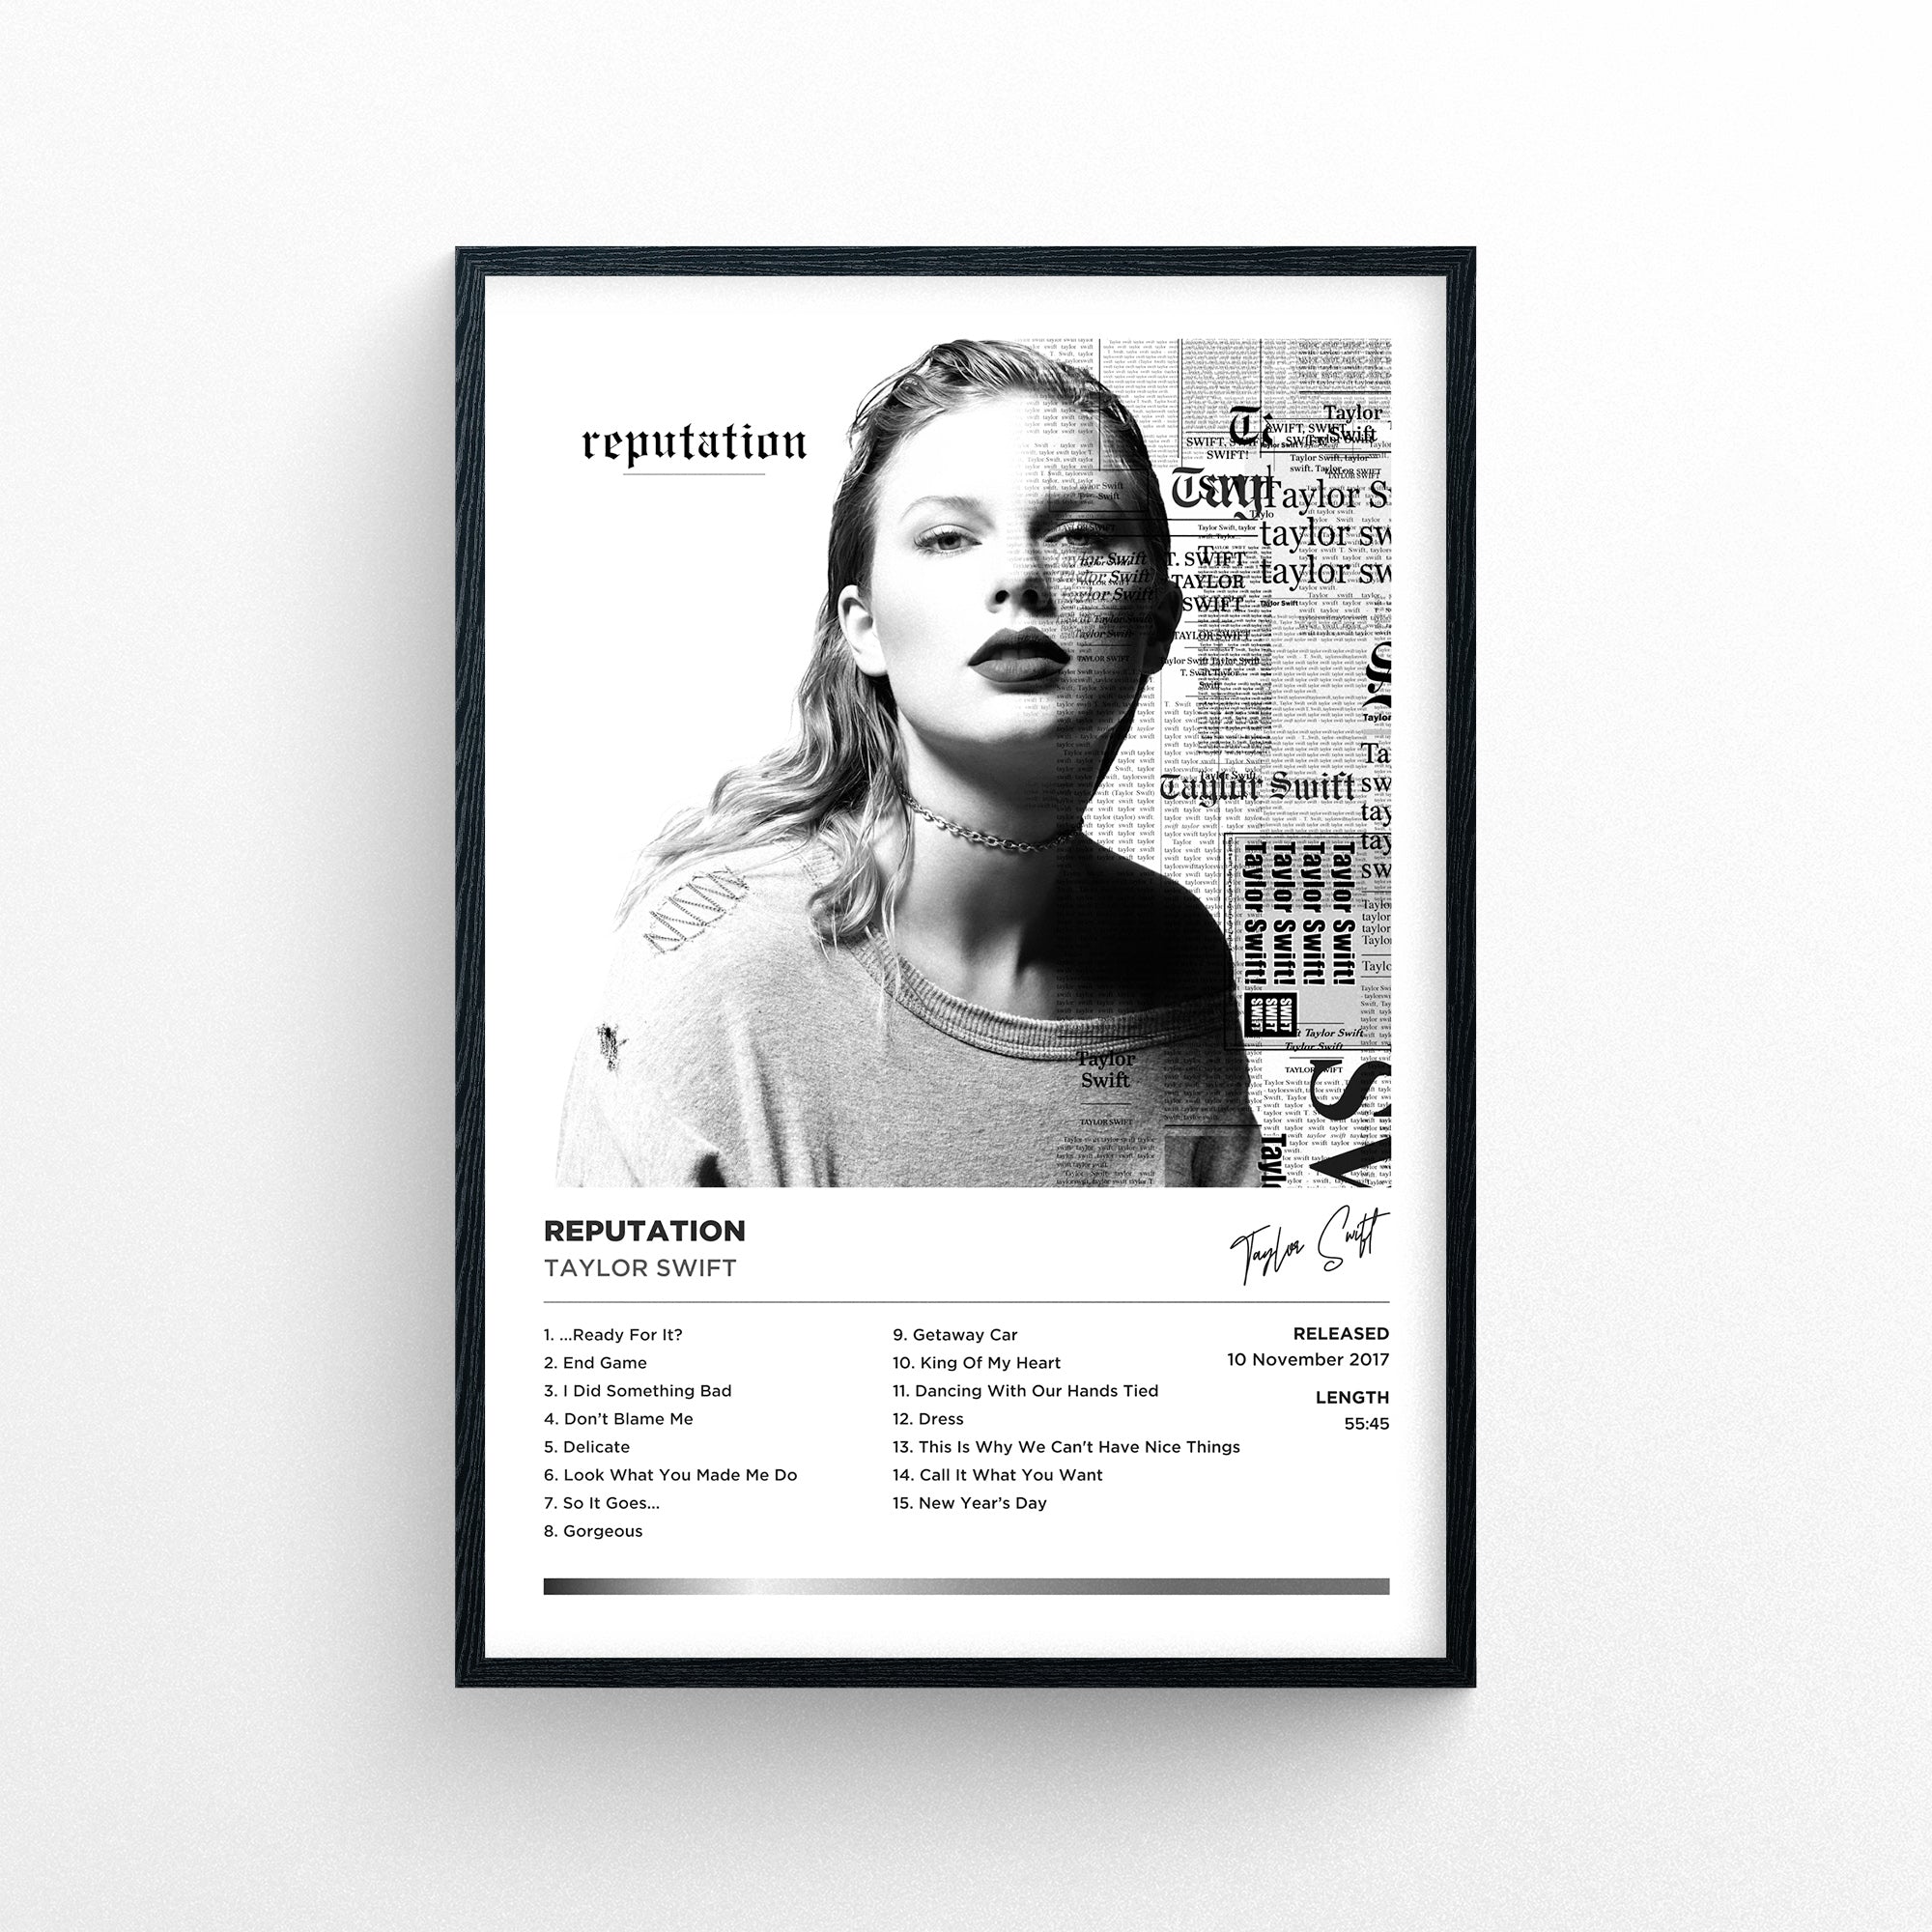 end game poster polaroid - taylor swift - reputation